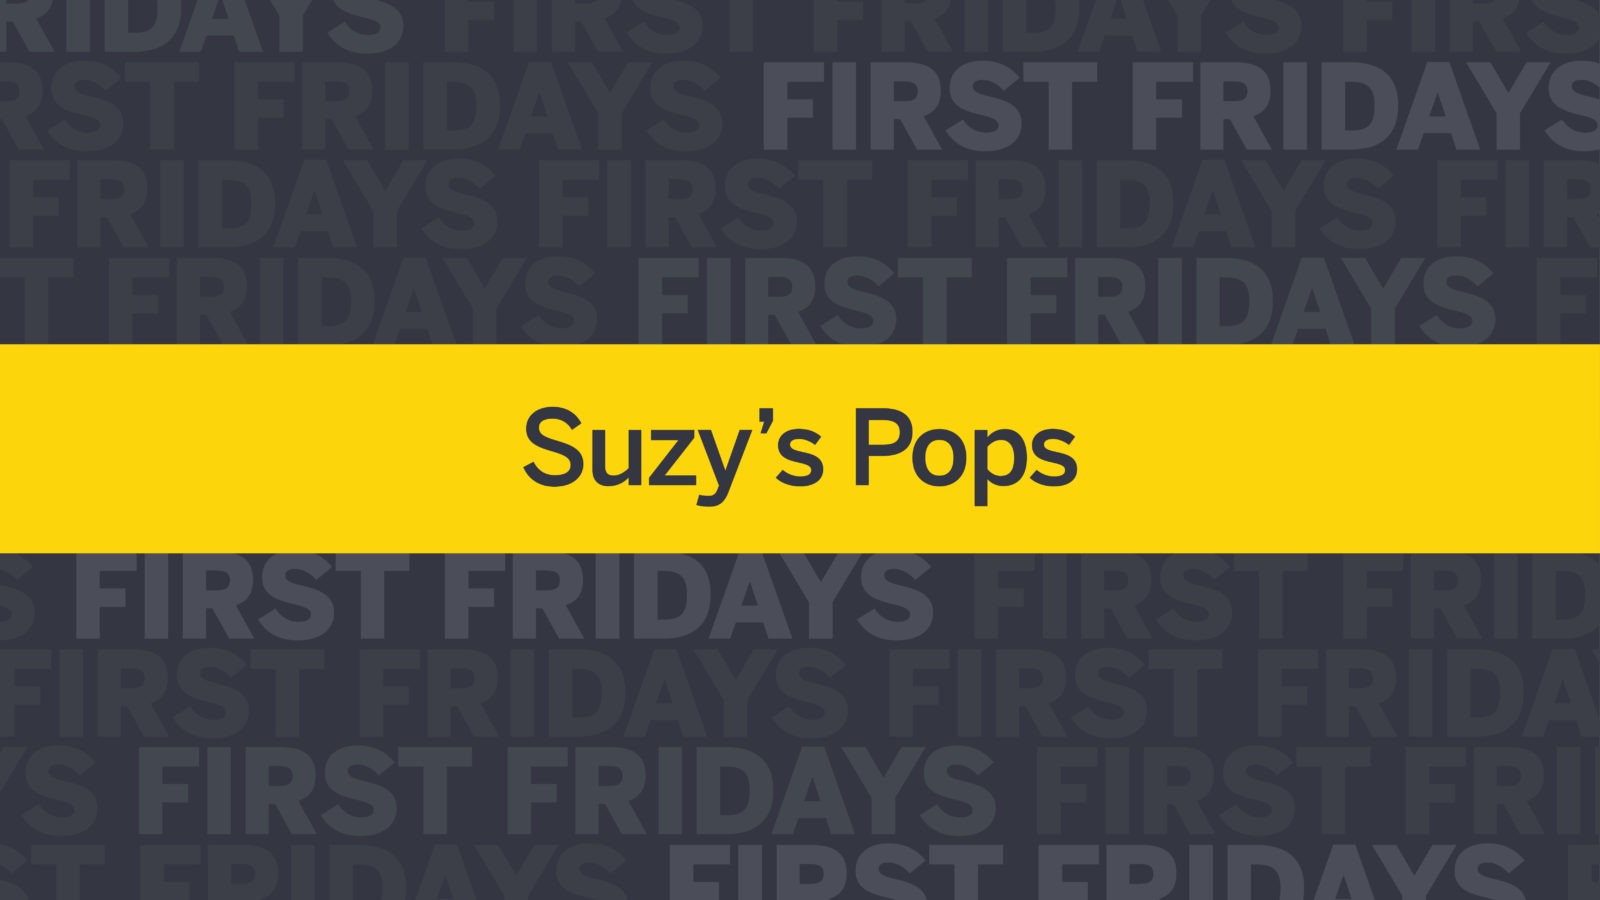 First Fridays: Suzy’s Pops